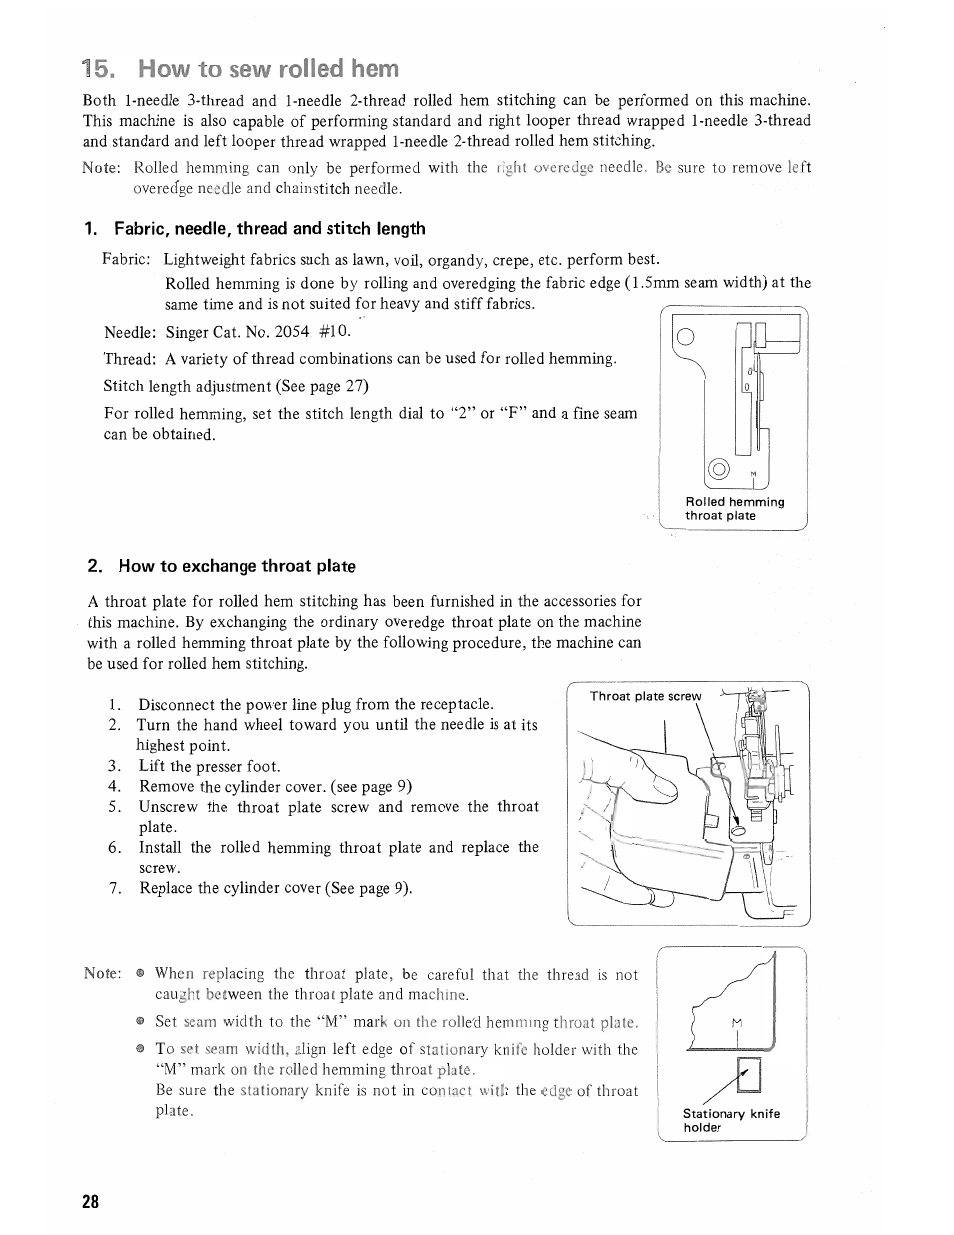 How to sew rolled hem | SINGER 14U285B User Manual | Page 30 / 48